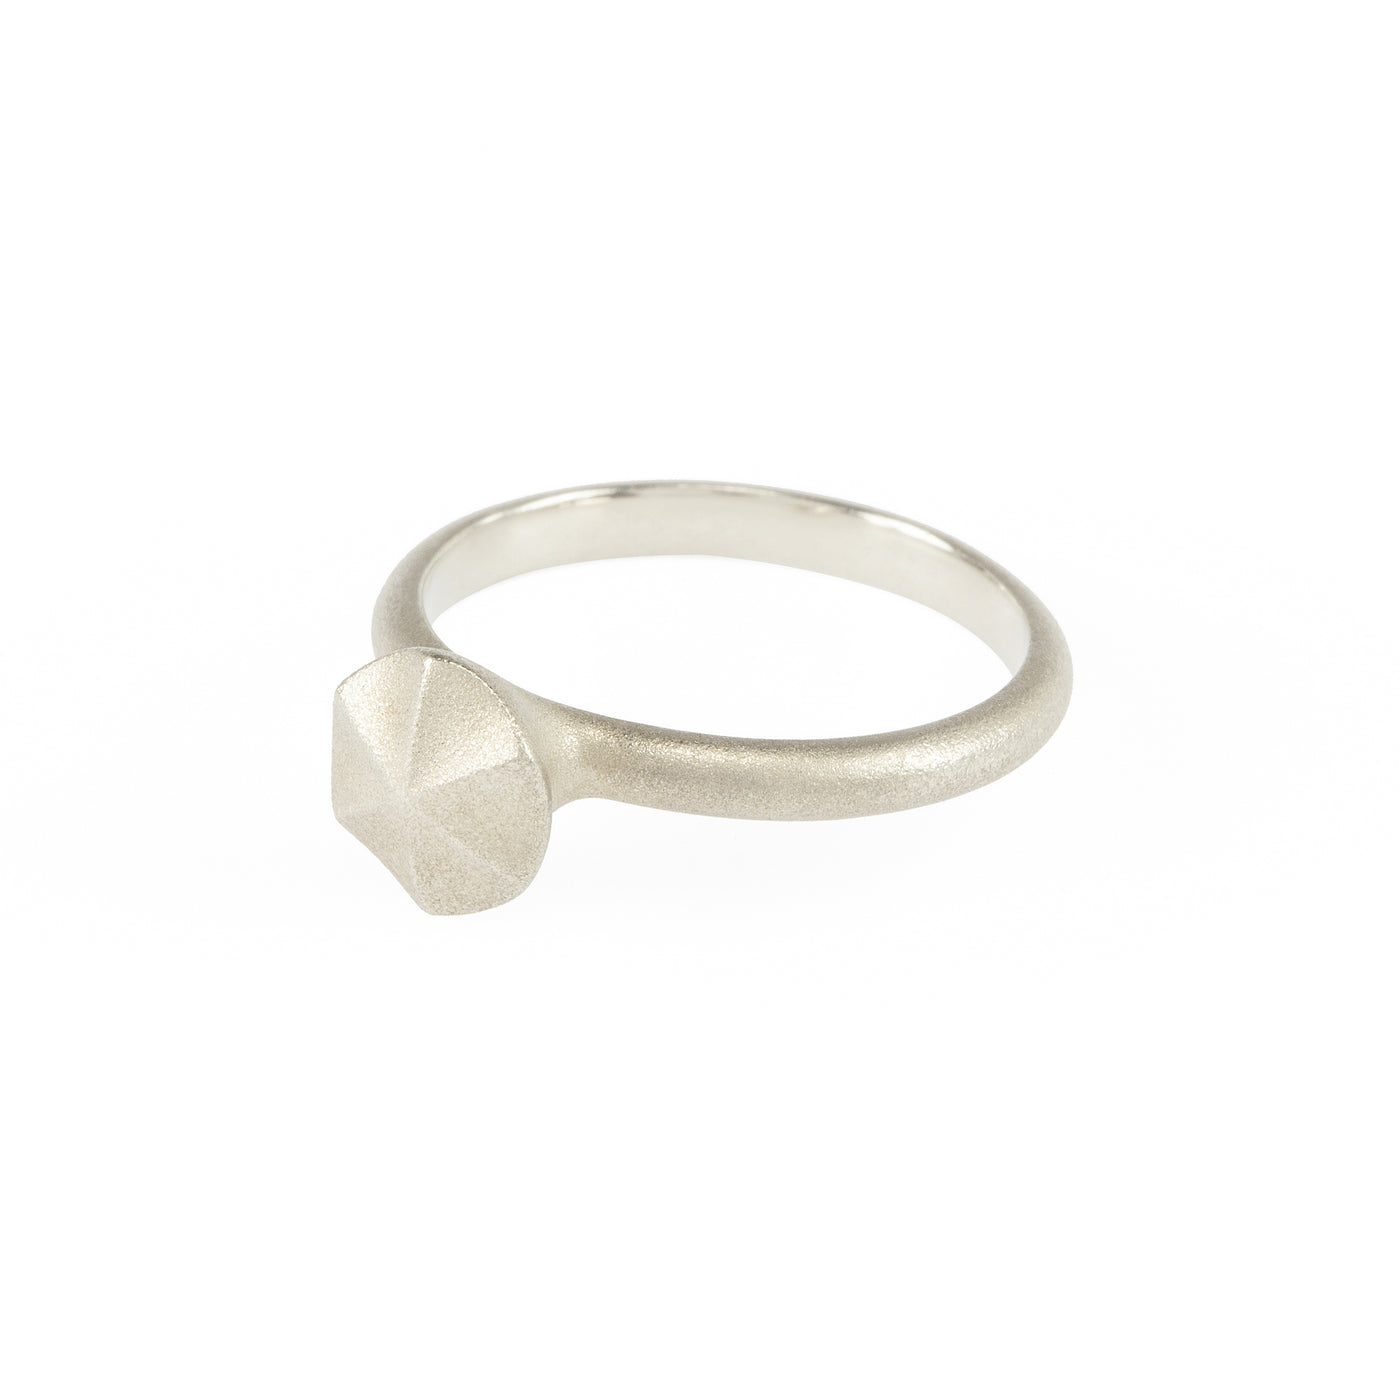 Sustainable silver ring. This artisan crafted Growth Ring is handmade in Cape Town in recycled silver from e-waste.